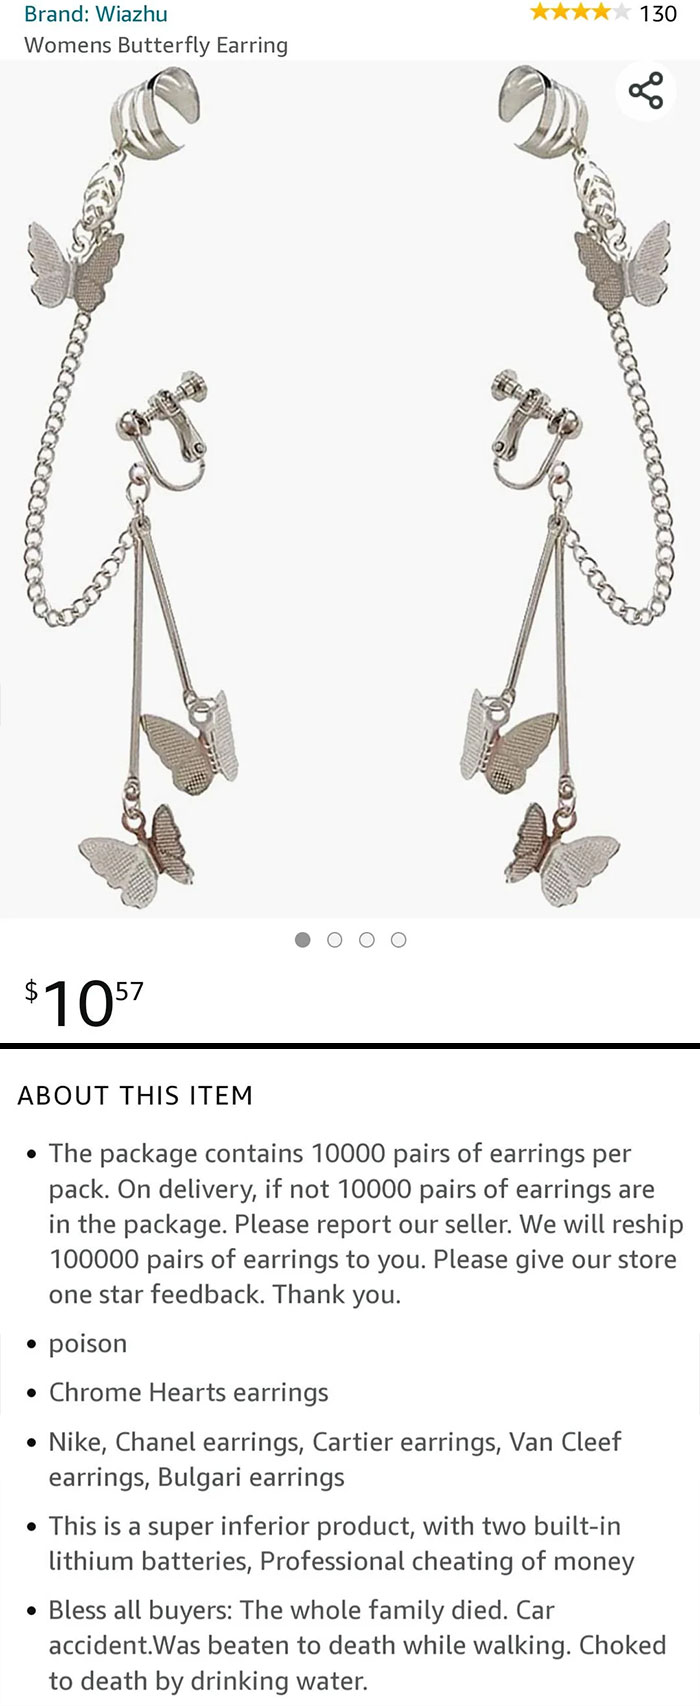 Say What You Will About Poison, 10000 Pairs Of Earrings For $10.57 Is A Deal